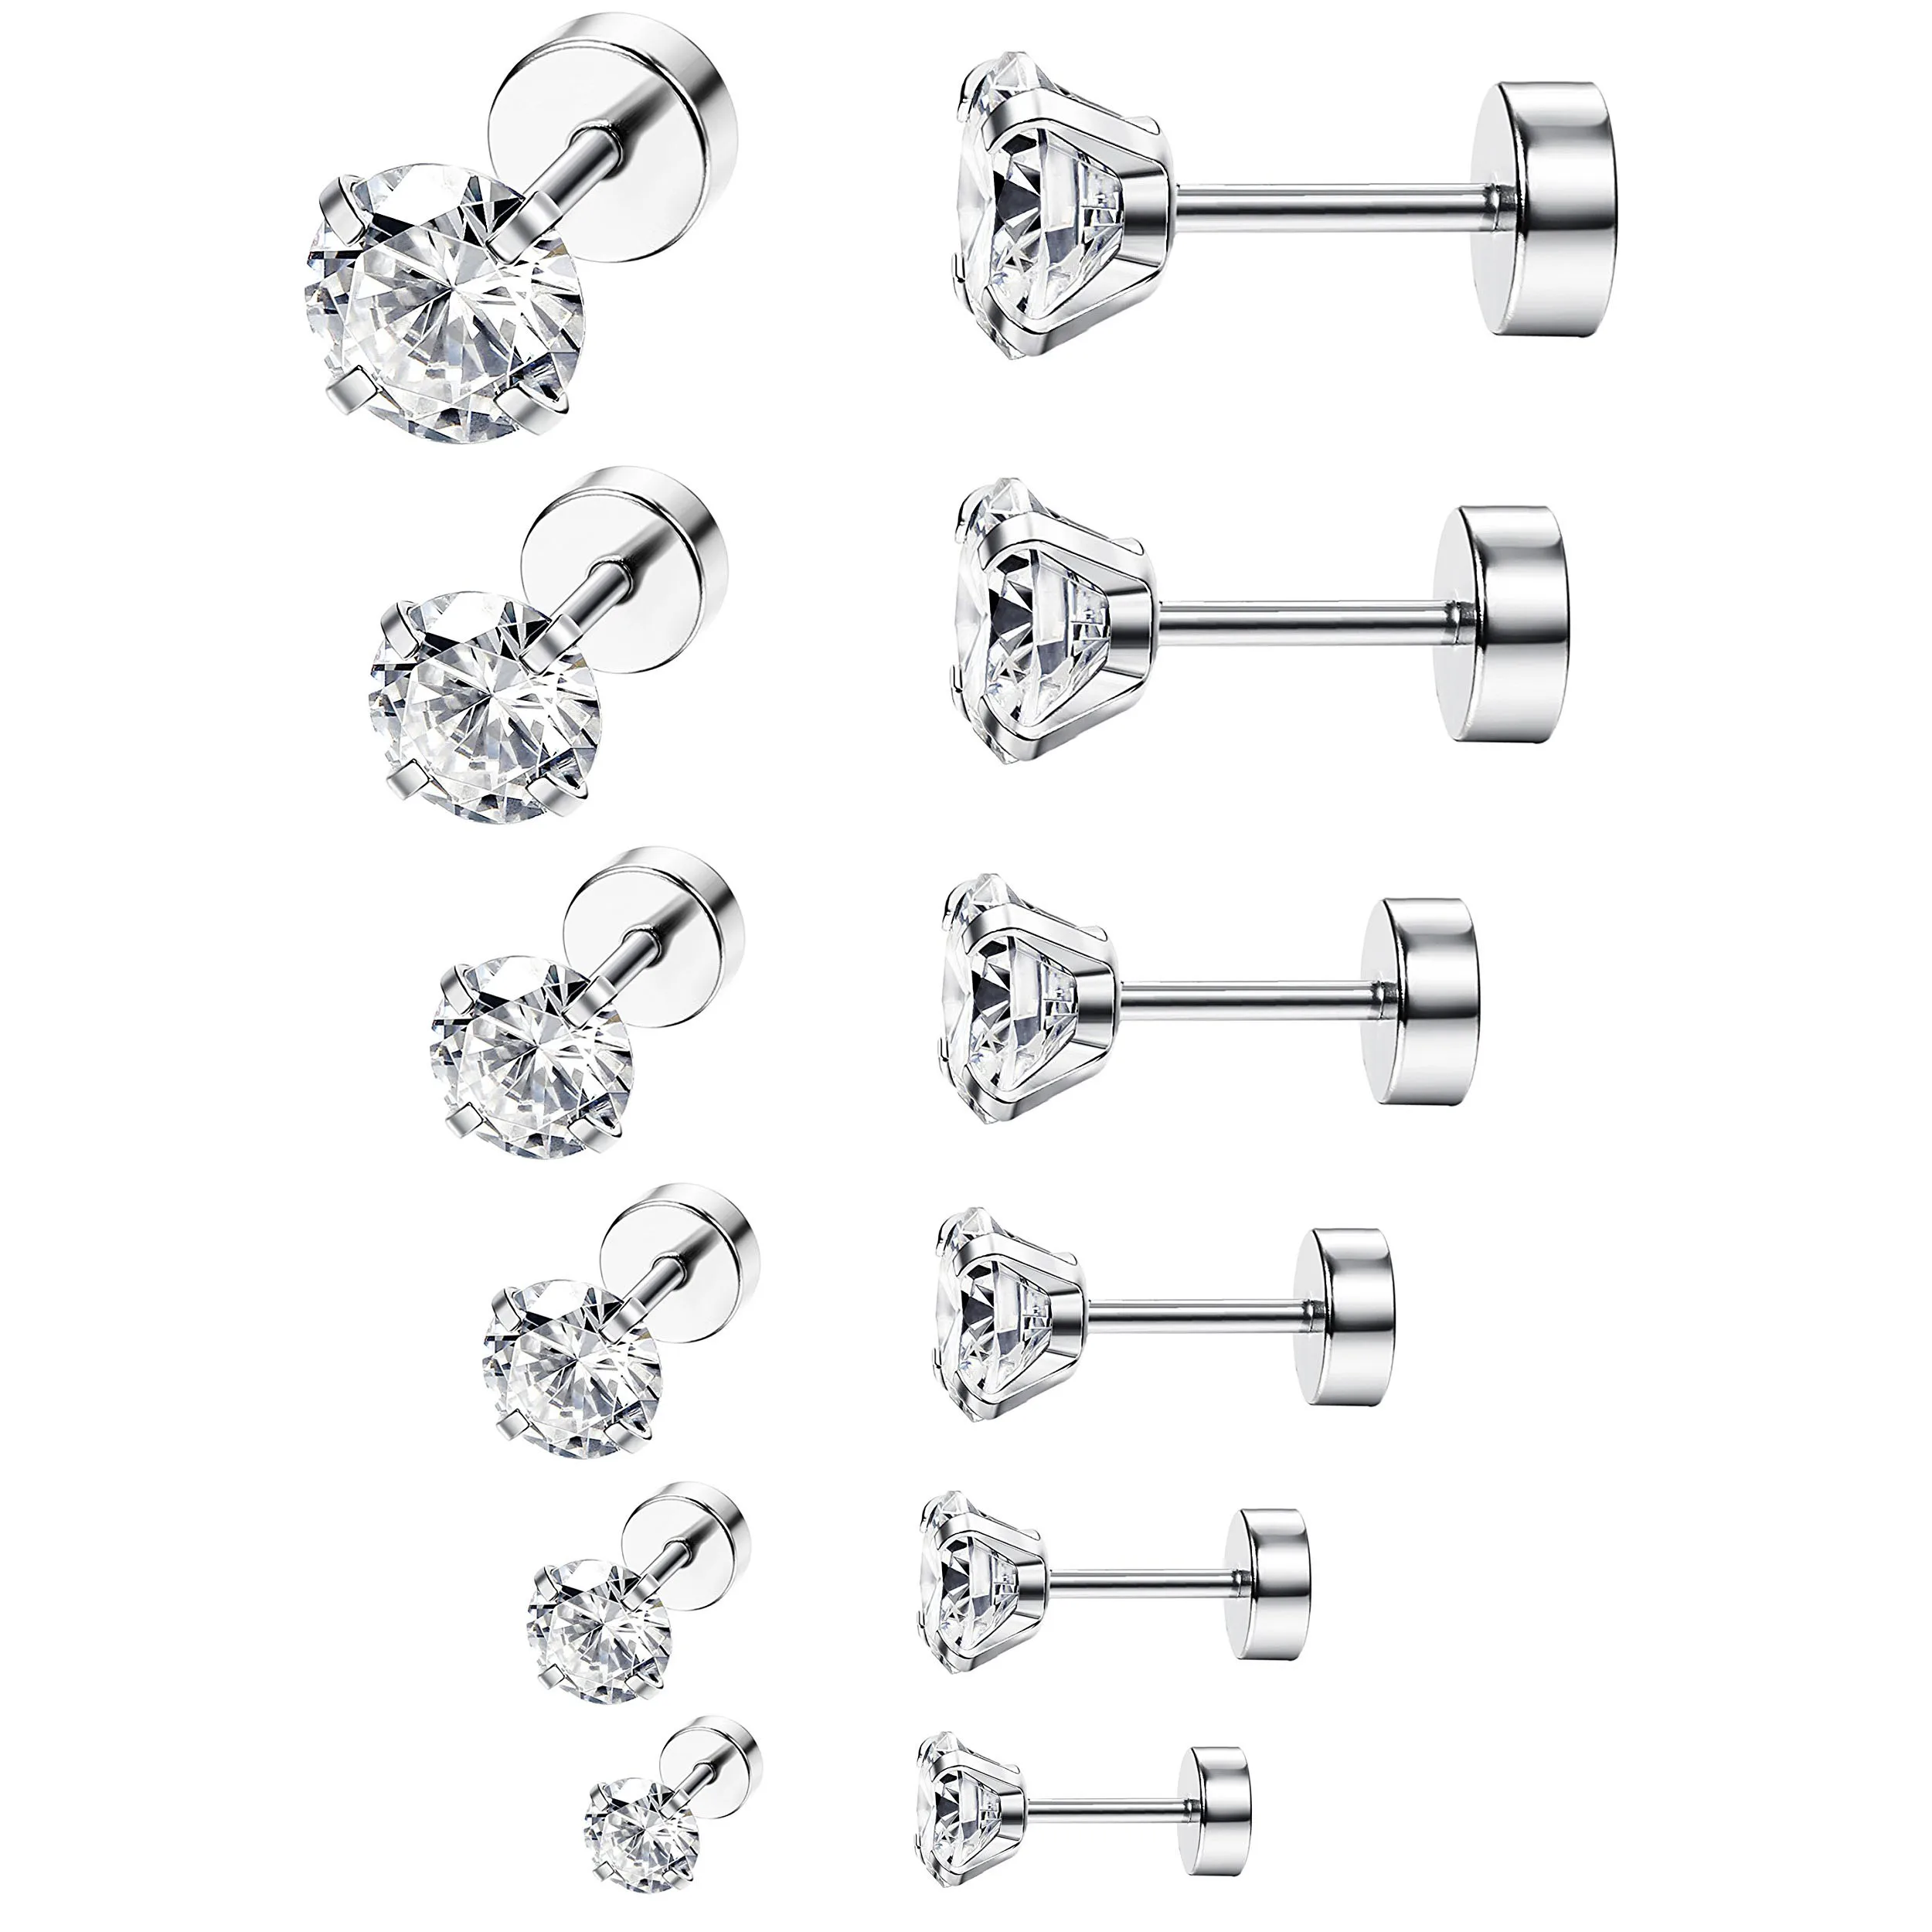 1/6 Pairs 18G Stainless Steel Ear Stud Piercing Barbell Studs Earrings Set Round Cubic Zirconia Inlaid Steel Size 2/4/5/6/8/10MM